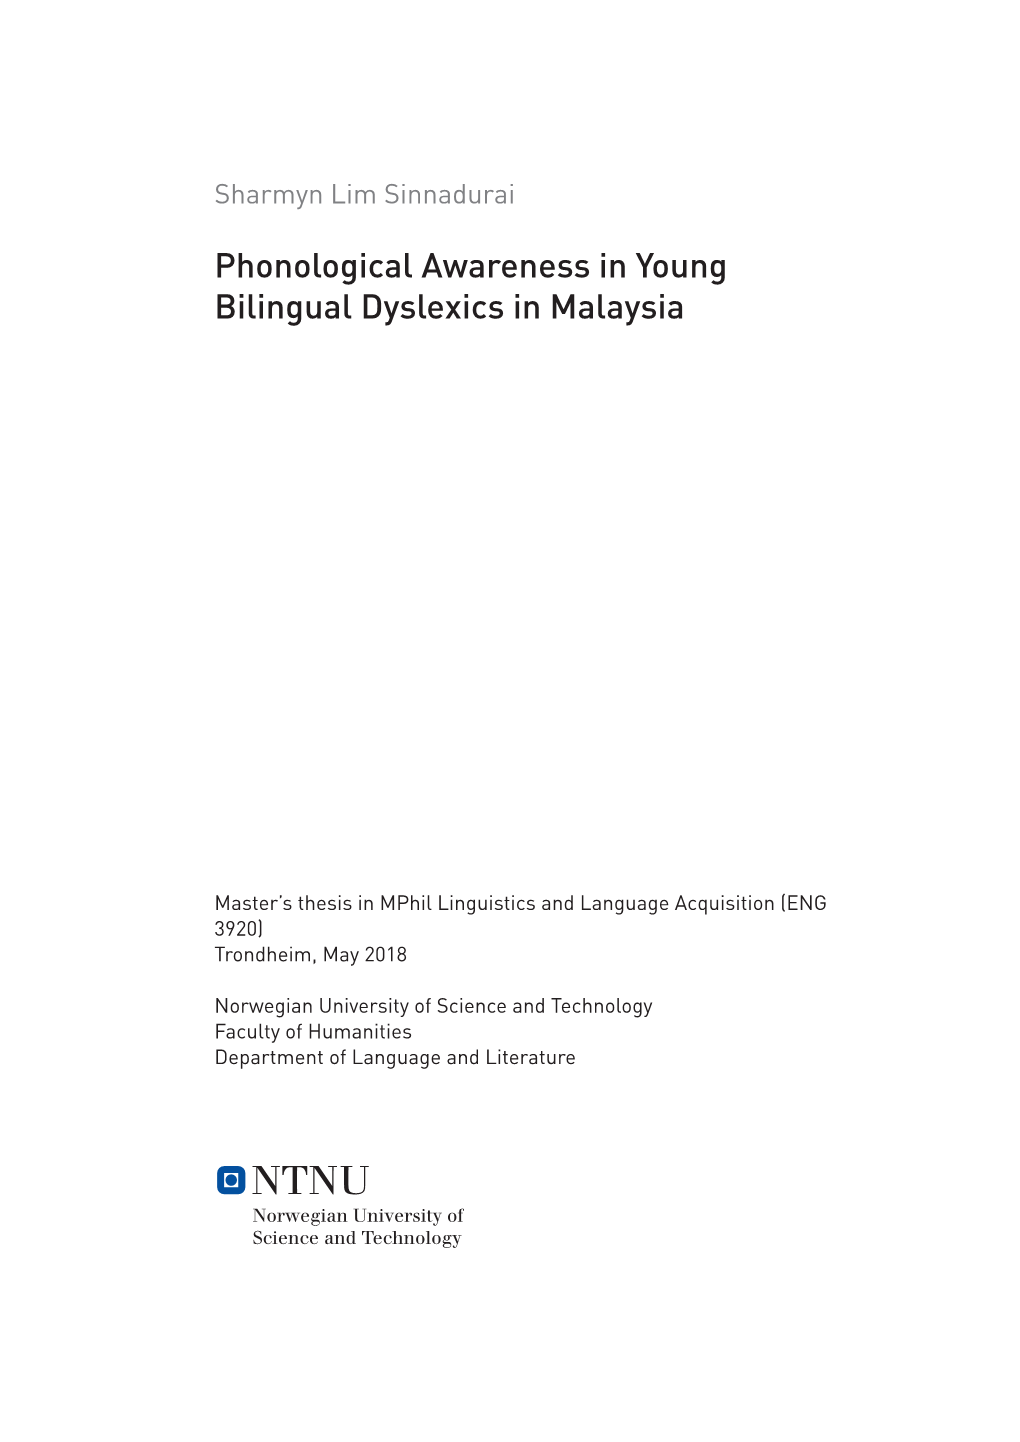 Phonological Awareness in Young Bilingual Dyslexics in Malaysia